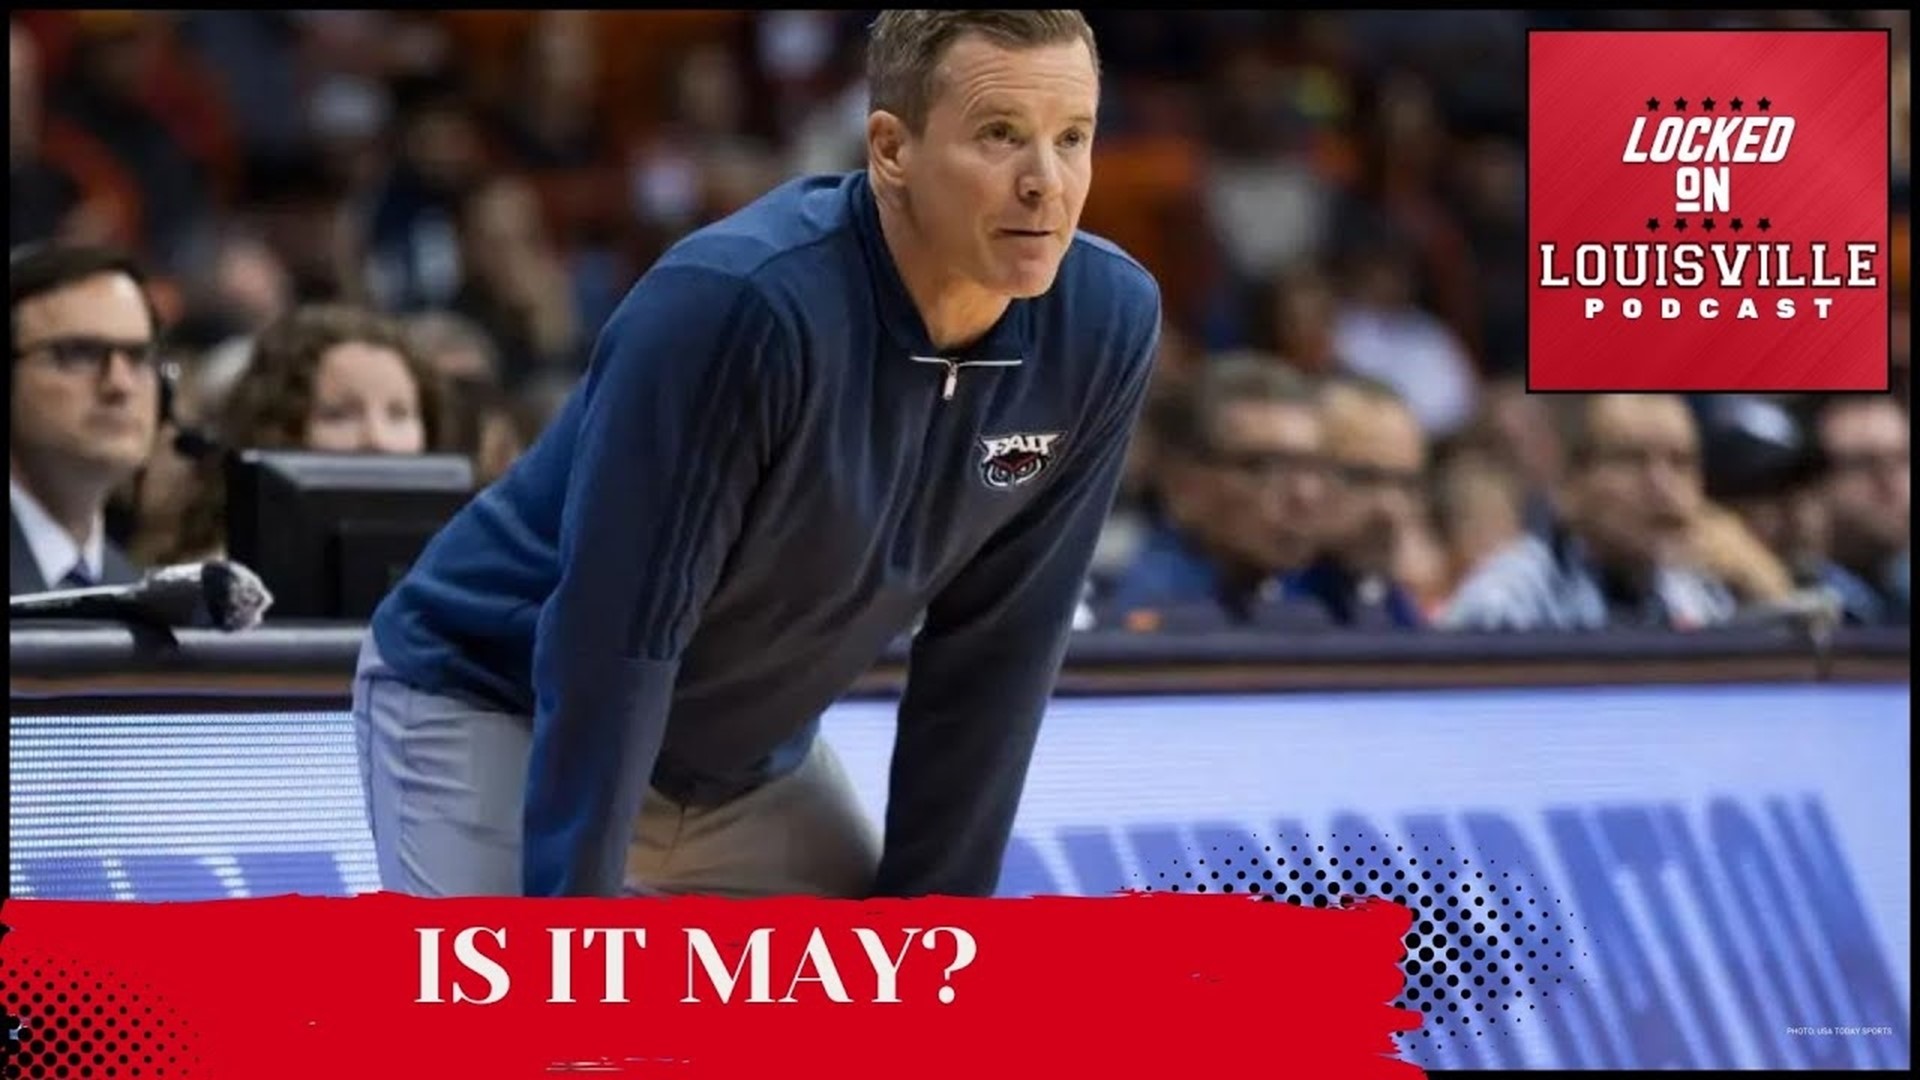 Dalton discusses Florida Atlantic's Dusty May as a possible option for the open Louisville basketball head coaching job.